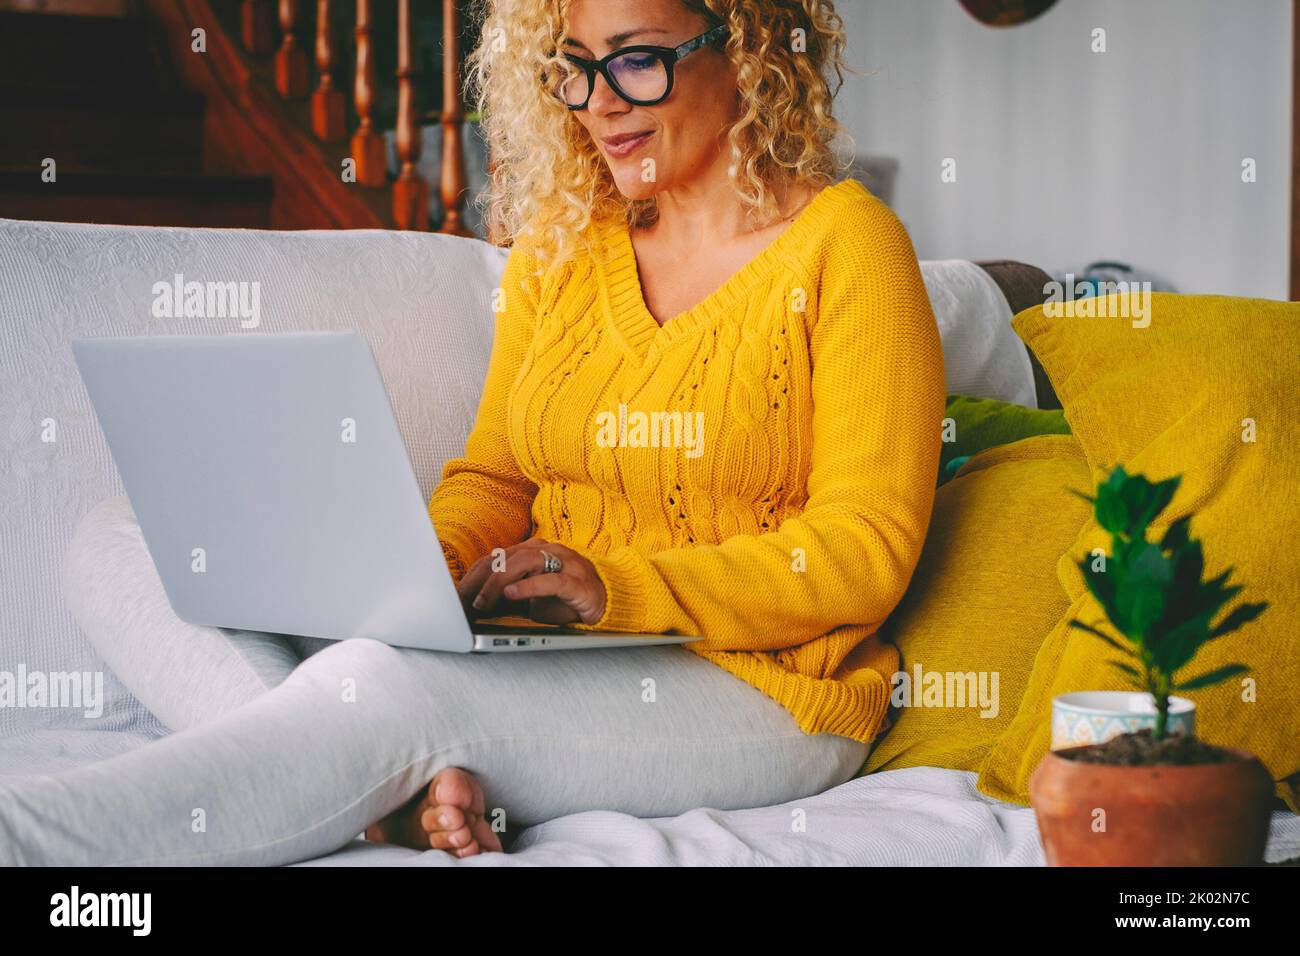 Pretty middle age woman writing on laptop and smiling. Single lady using computer alone at home. Blonde female adult enjoy leisure time with wireless notebook connection sitting and relaxing Stock Photo